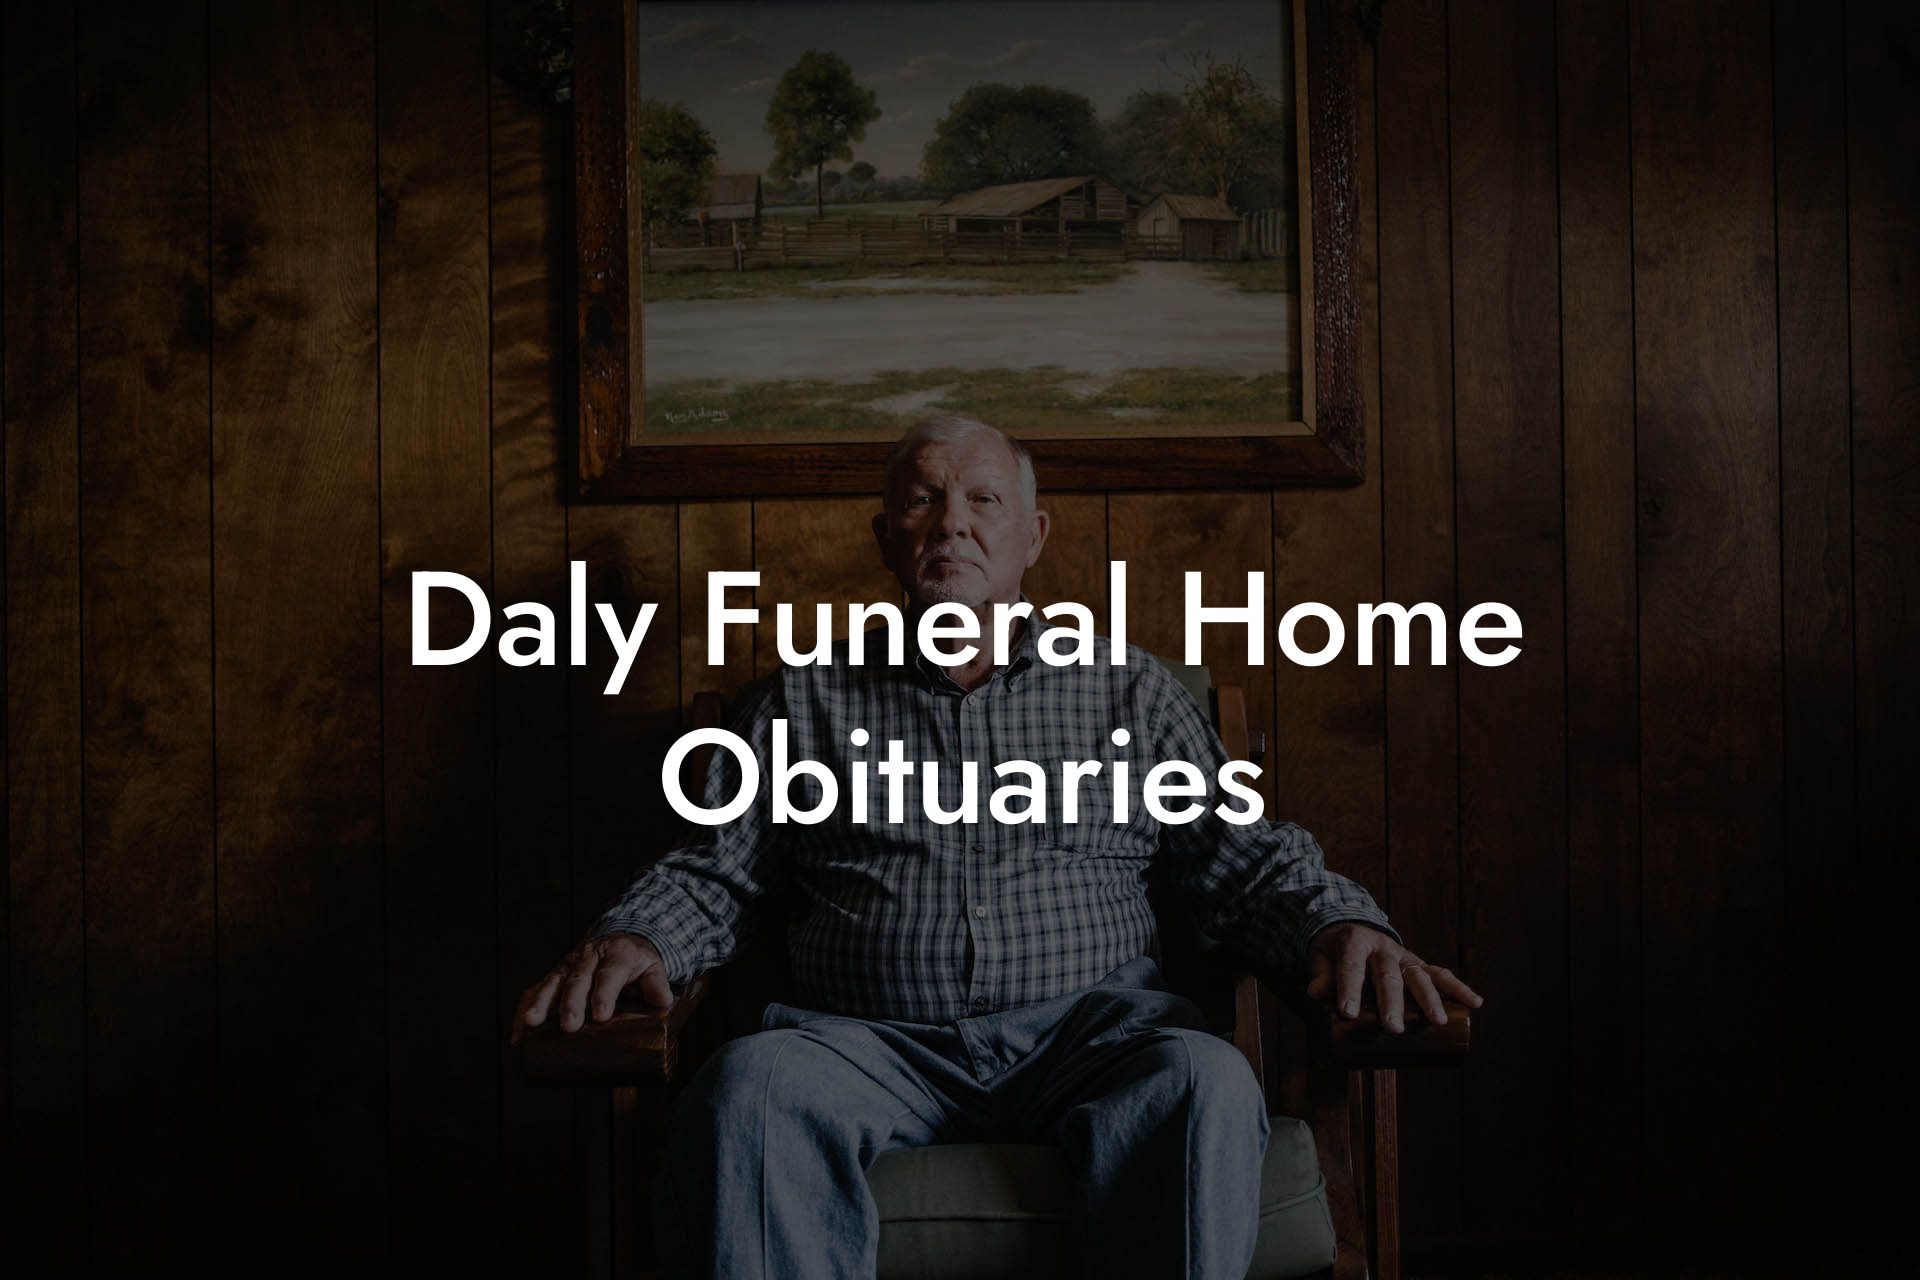 Daly Funeral Home Obituaries